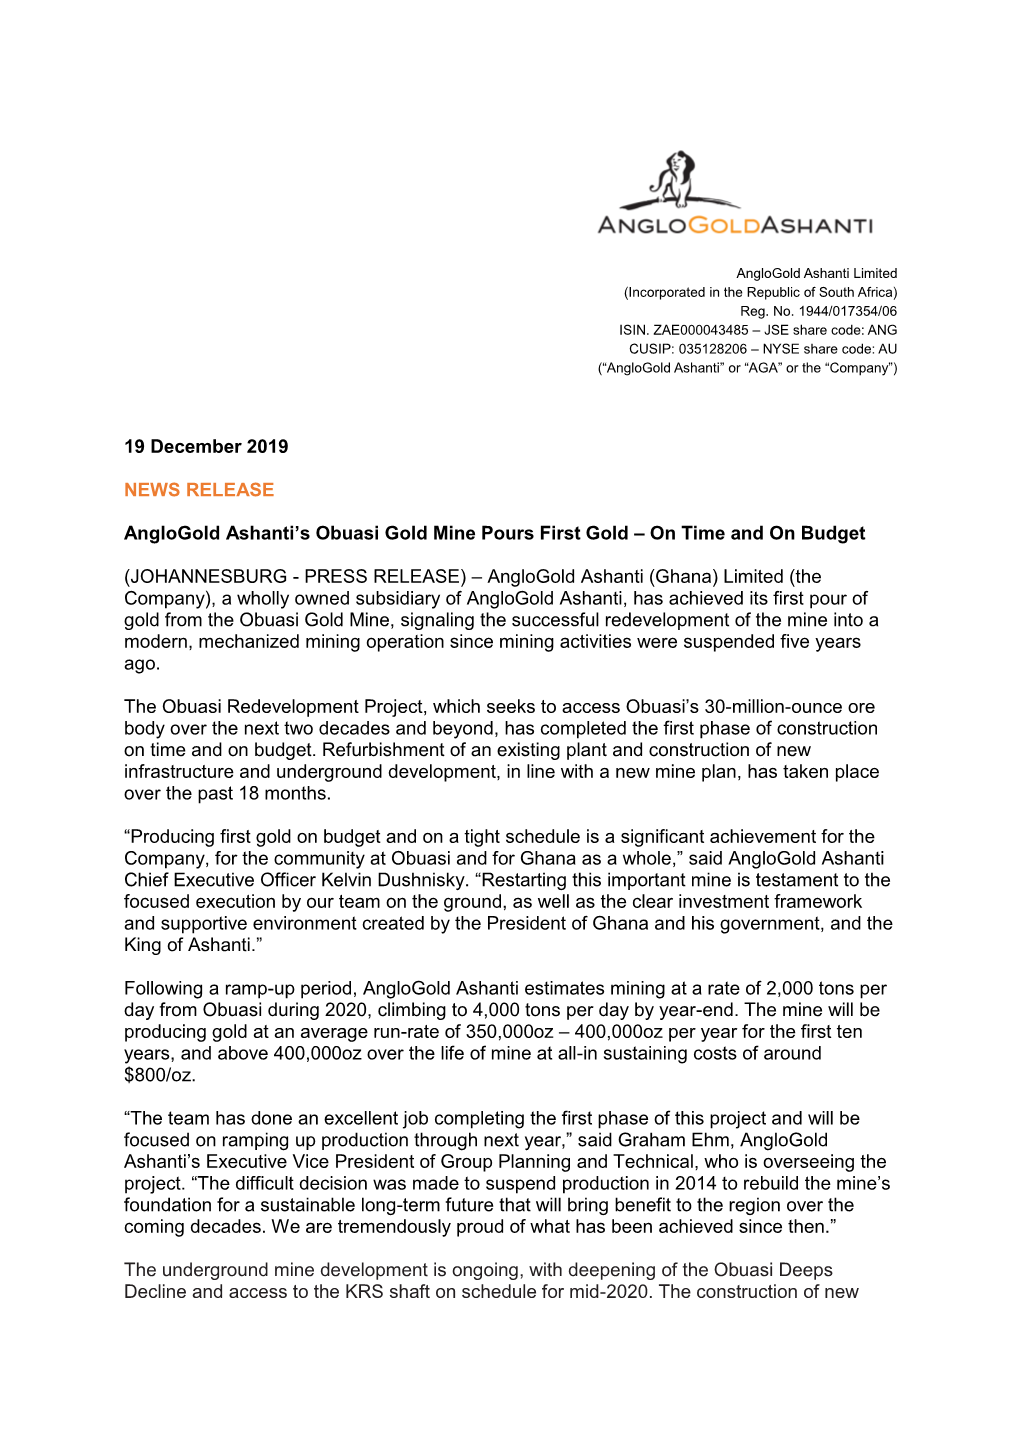 19 December 2019 NEWS RELEASE Anglogold Ashanti's Obuasi Gold